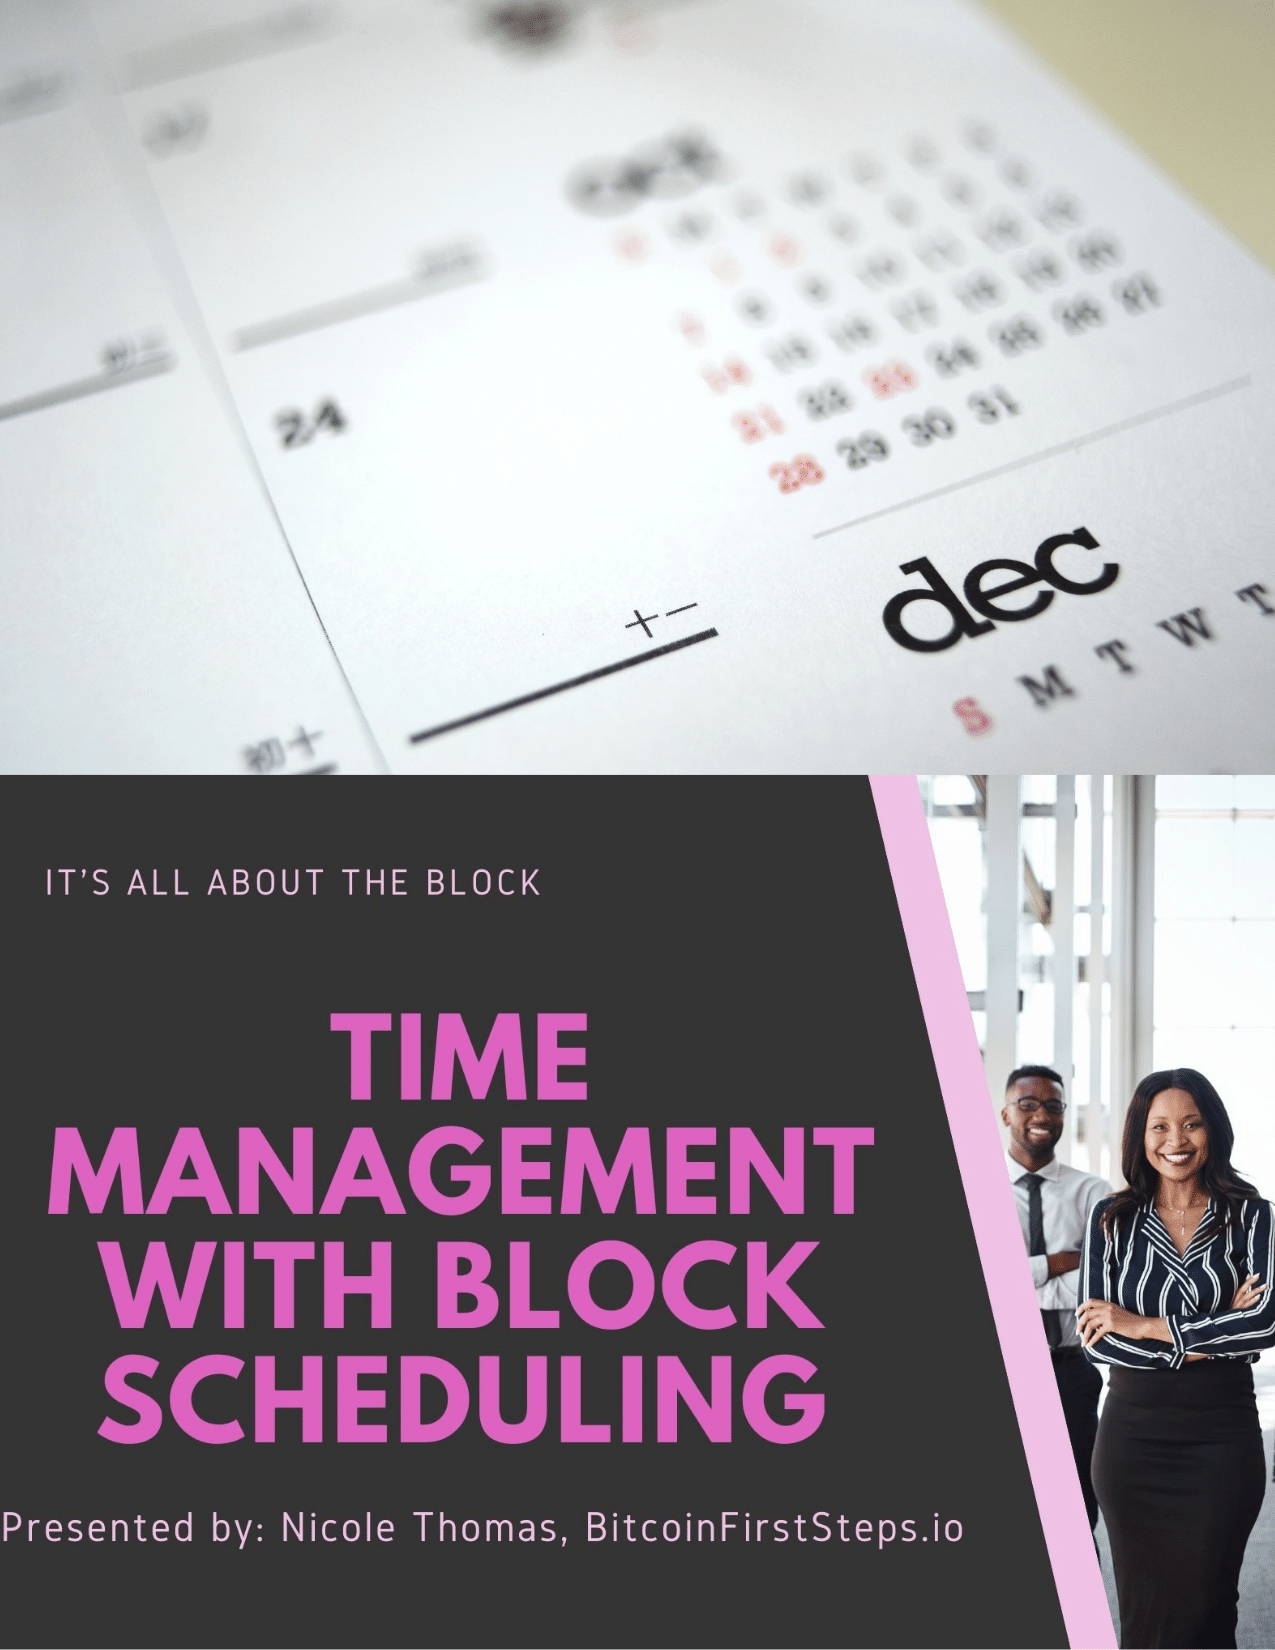 time management with block scheduling presentation nicole thomas